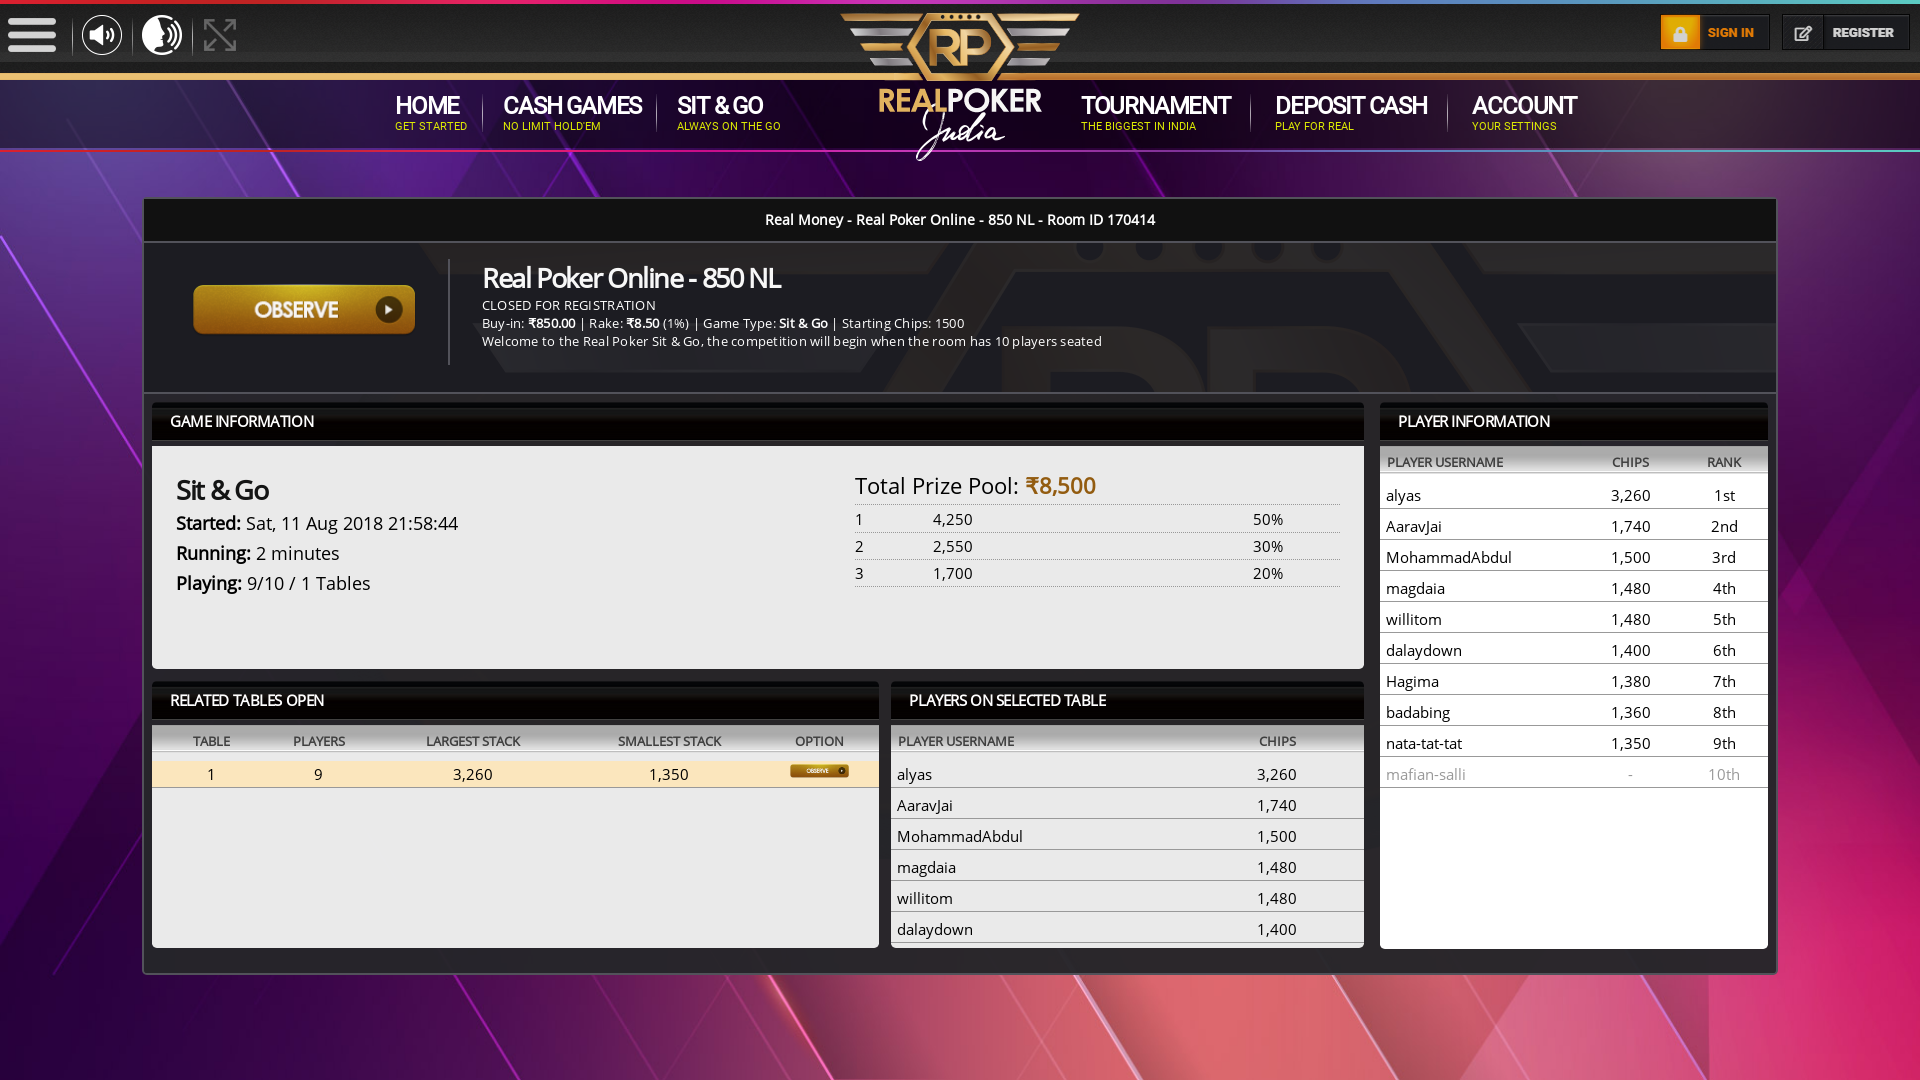 Mormugao Goa online poker game on a 10 player table in the 2nd minute of the match